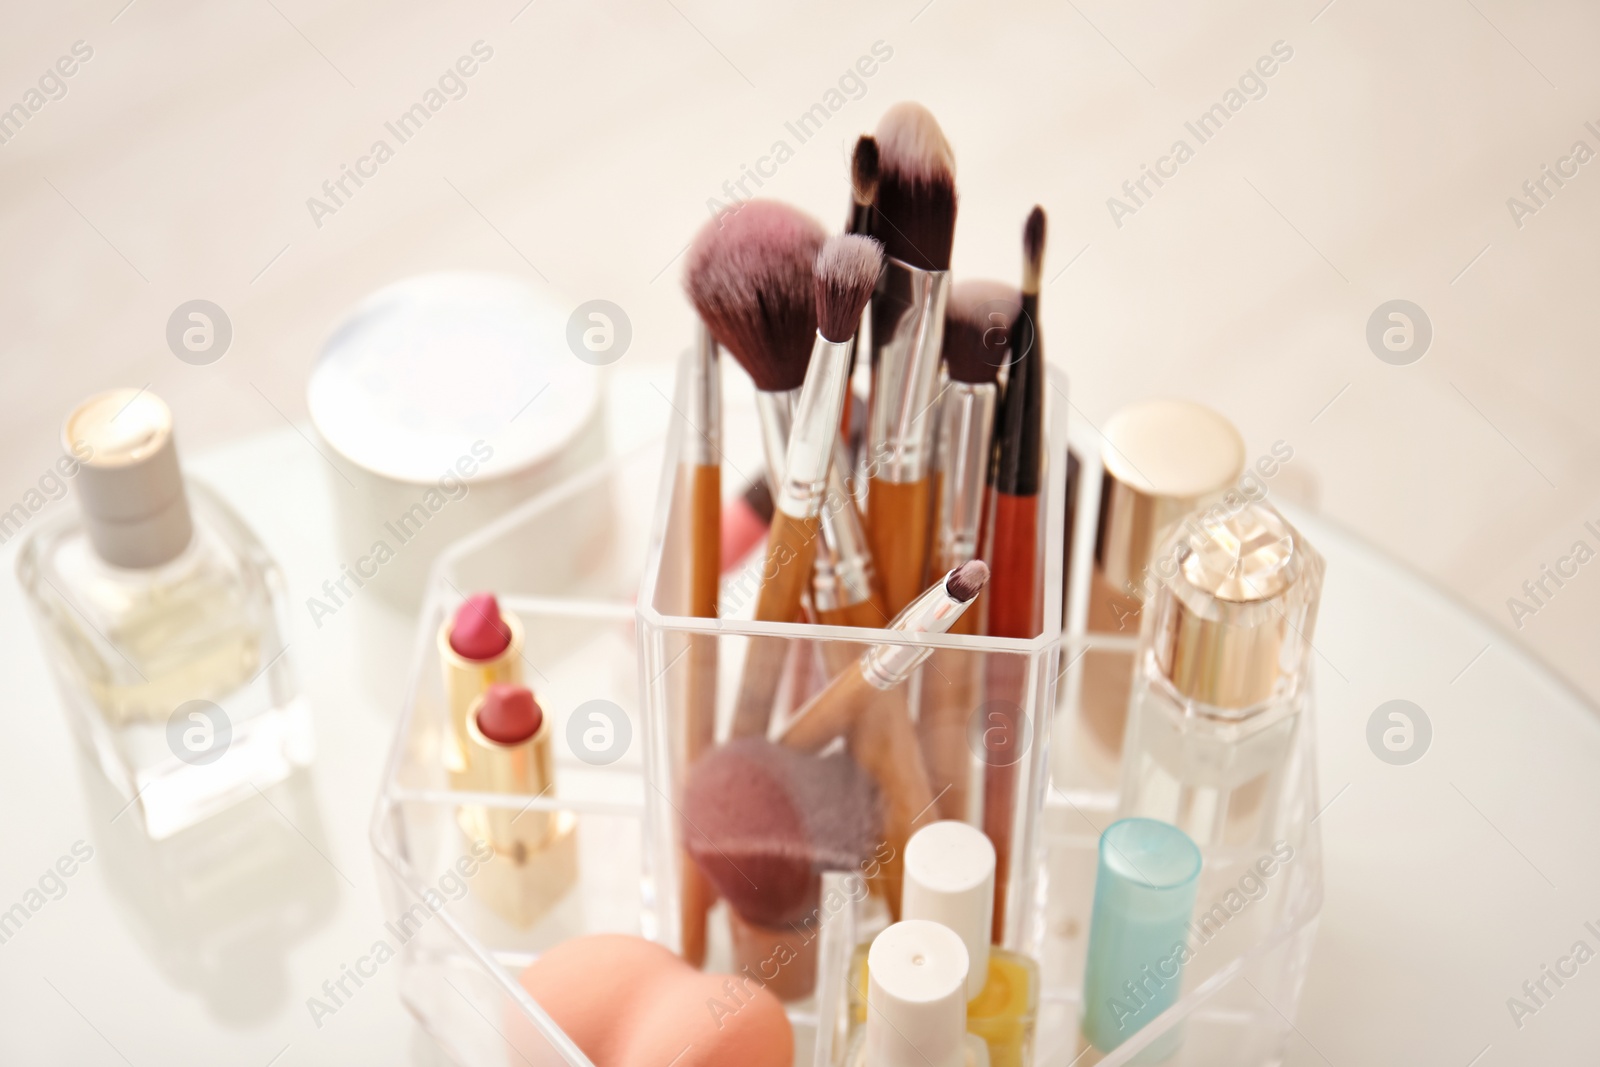 Photo of Makeup cosmetic products and tools in organizer on dressing table, closeup